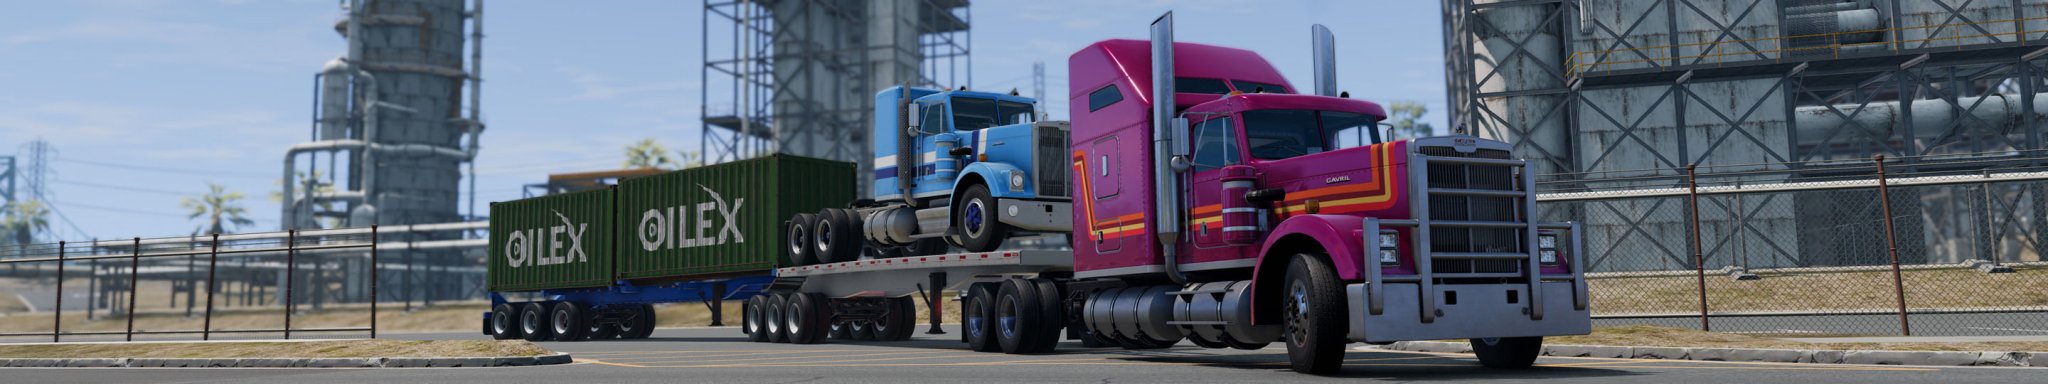 0 BeamNG Gavril T83 Long Haul CUSTOM with 2 TRAILERS at REFINERY copy.jpg